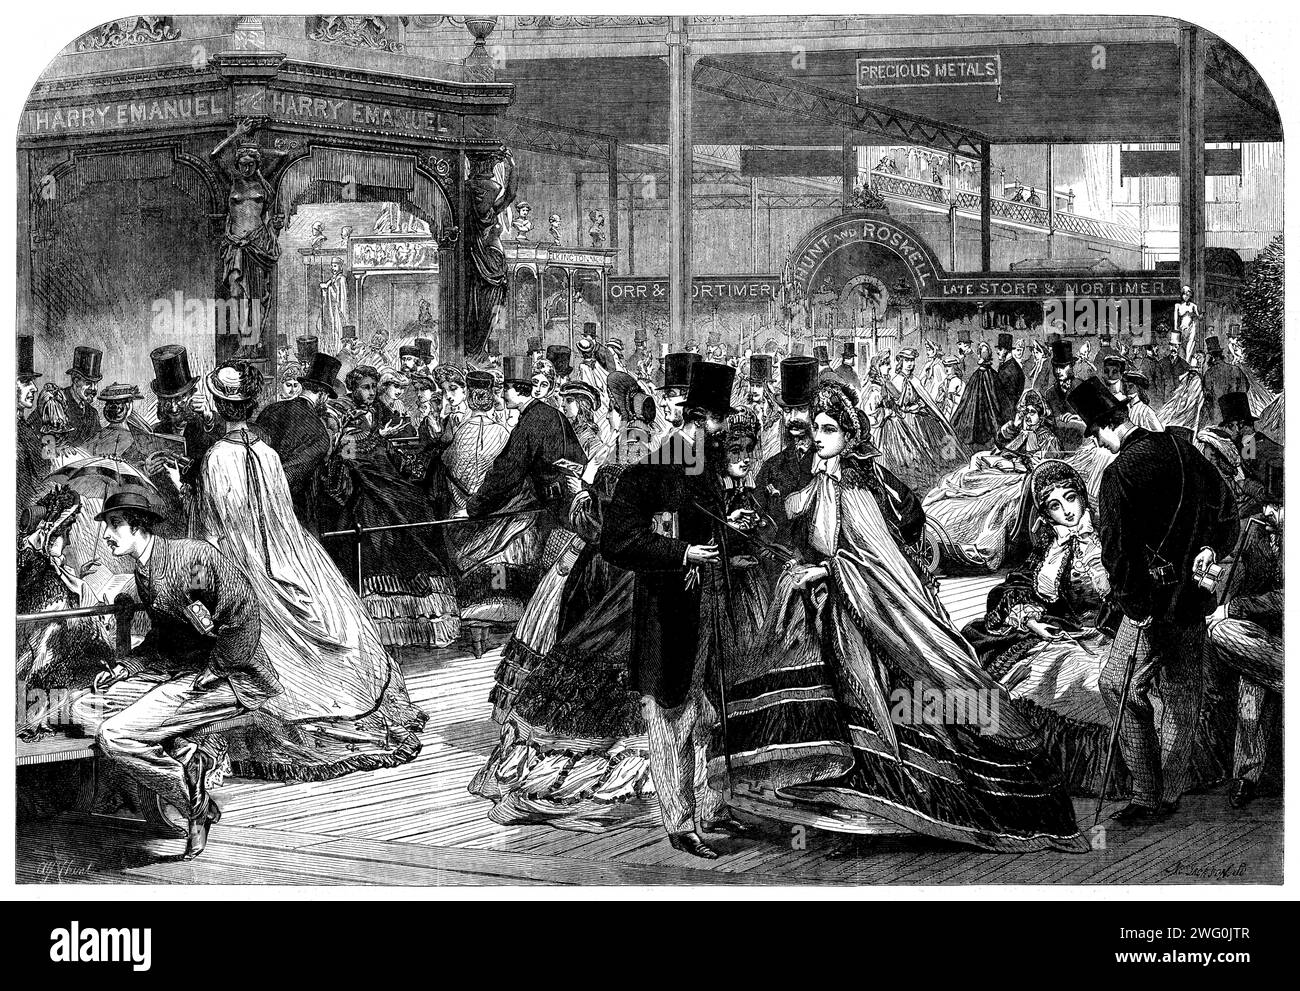 Half-crown Day at the International Exhibition, 1862. The International Exhibition of 1862 was a world's fair held in South Kensington, London. The site now houses museums including the Natural History Museum and the Science Museum. From &quot;Illustrated London News&quot;, 1862. Stock Photo